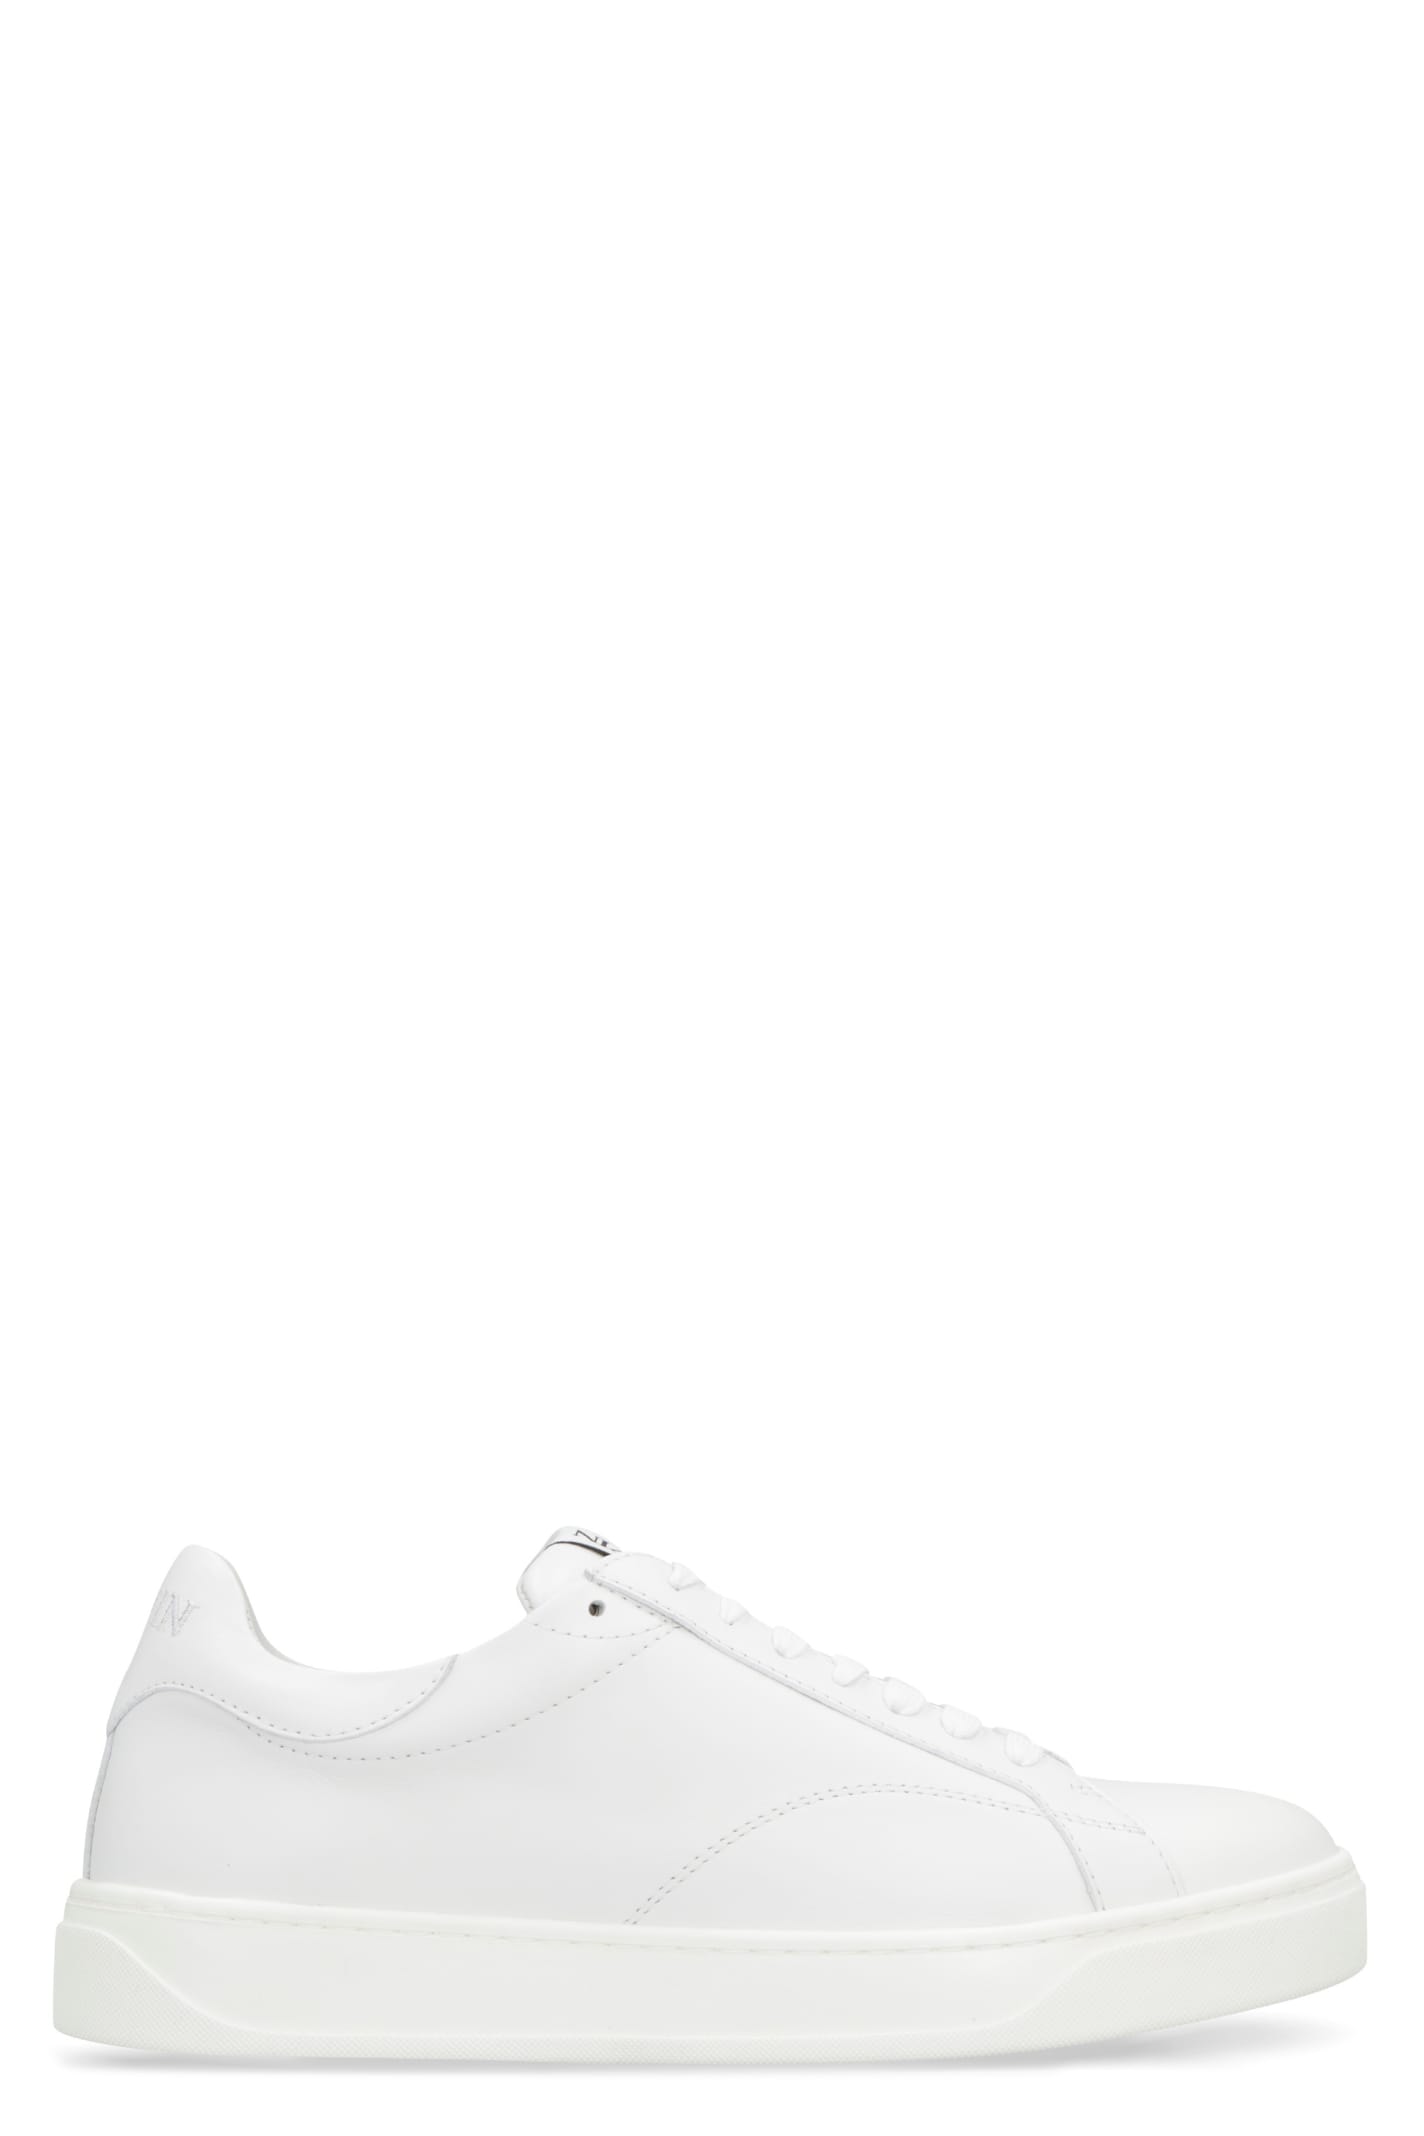 Shop Lanvin Ddb0 Leather Low-top Sneakers In White